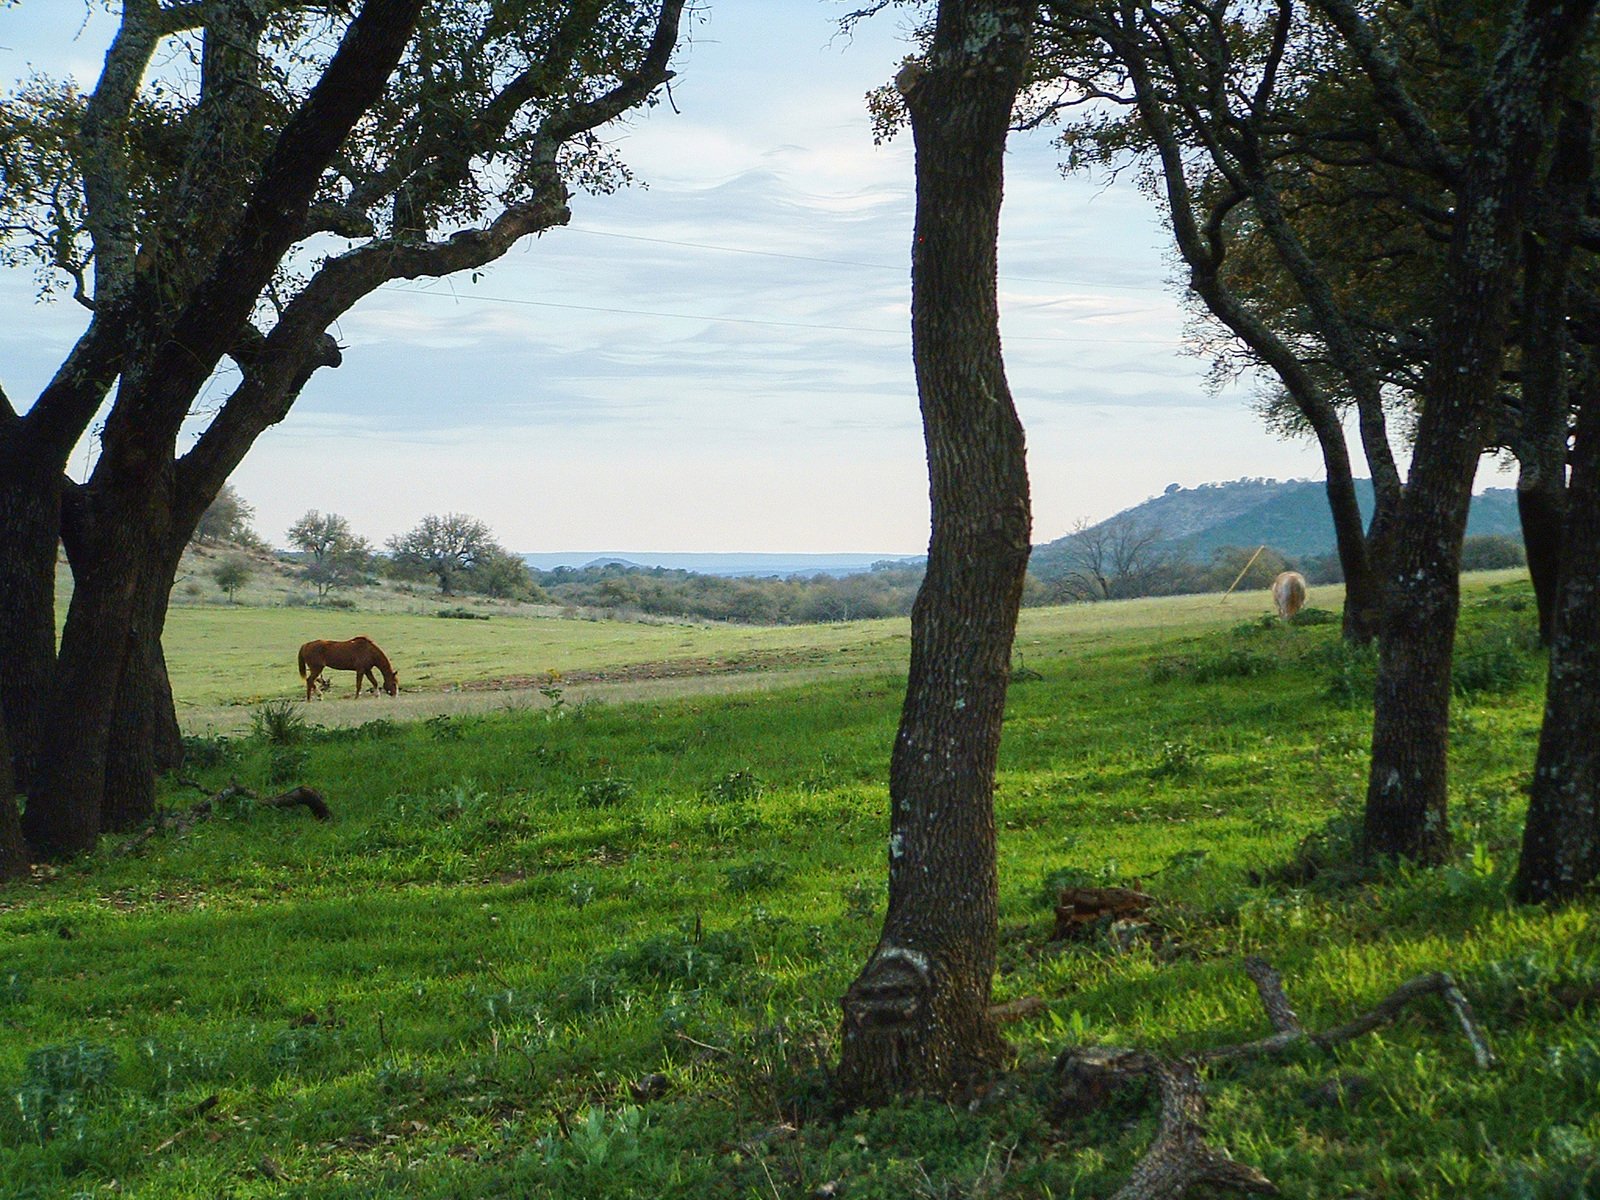 horses are grazing in a pasture surrounded by tall, tree - lined trees